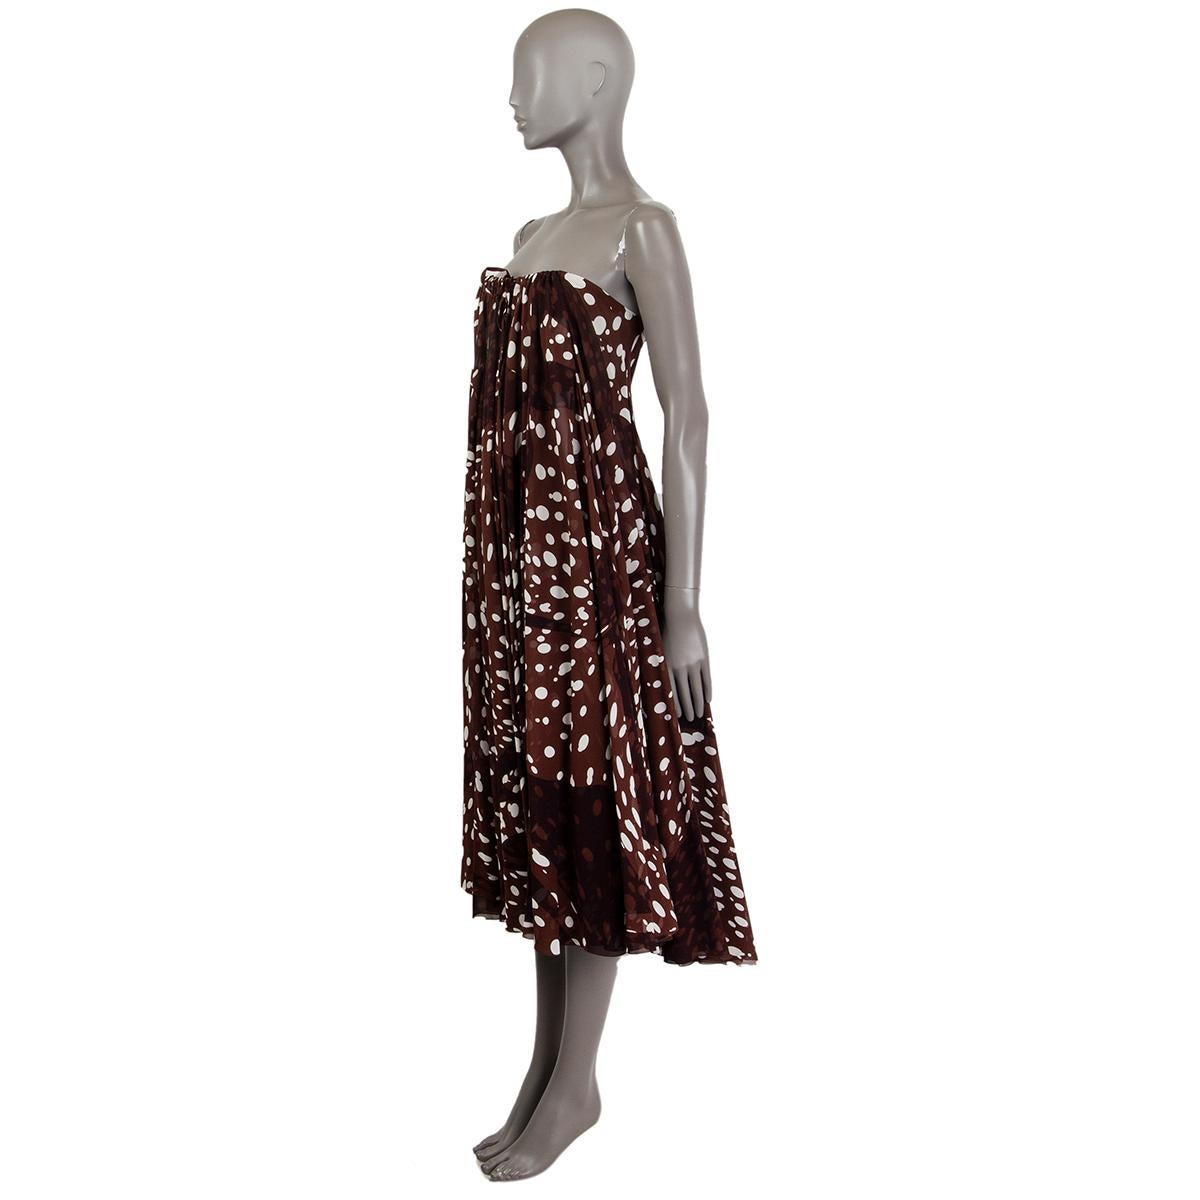 Hermés sleeveless dotted maxi dress in brown and off-white silk (100%). Fastens with an adjustable draw sting. Dress can also be worn as a skirt. Unlined and is semi-sheer. Has been worn and is in excellent condition. 

Tag Size 44
Size XL
Bust